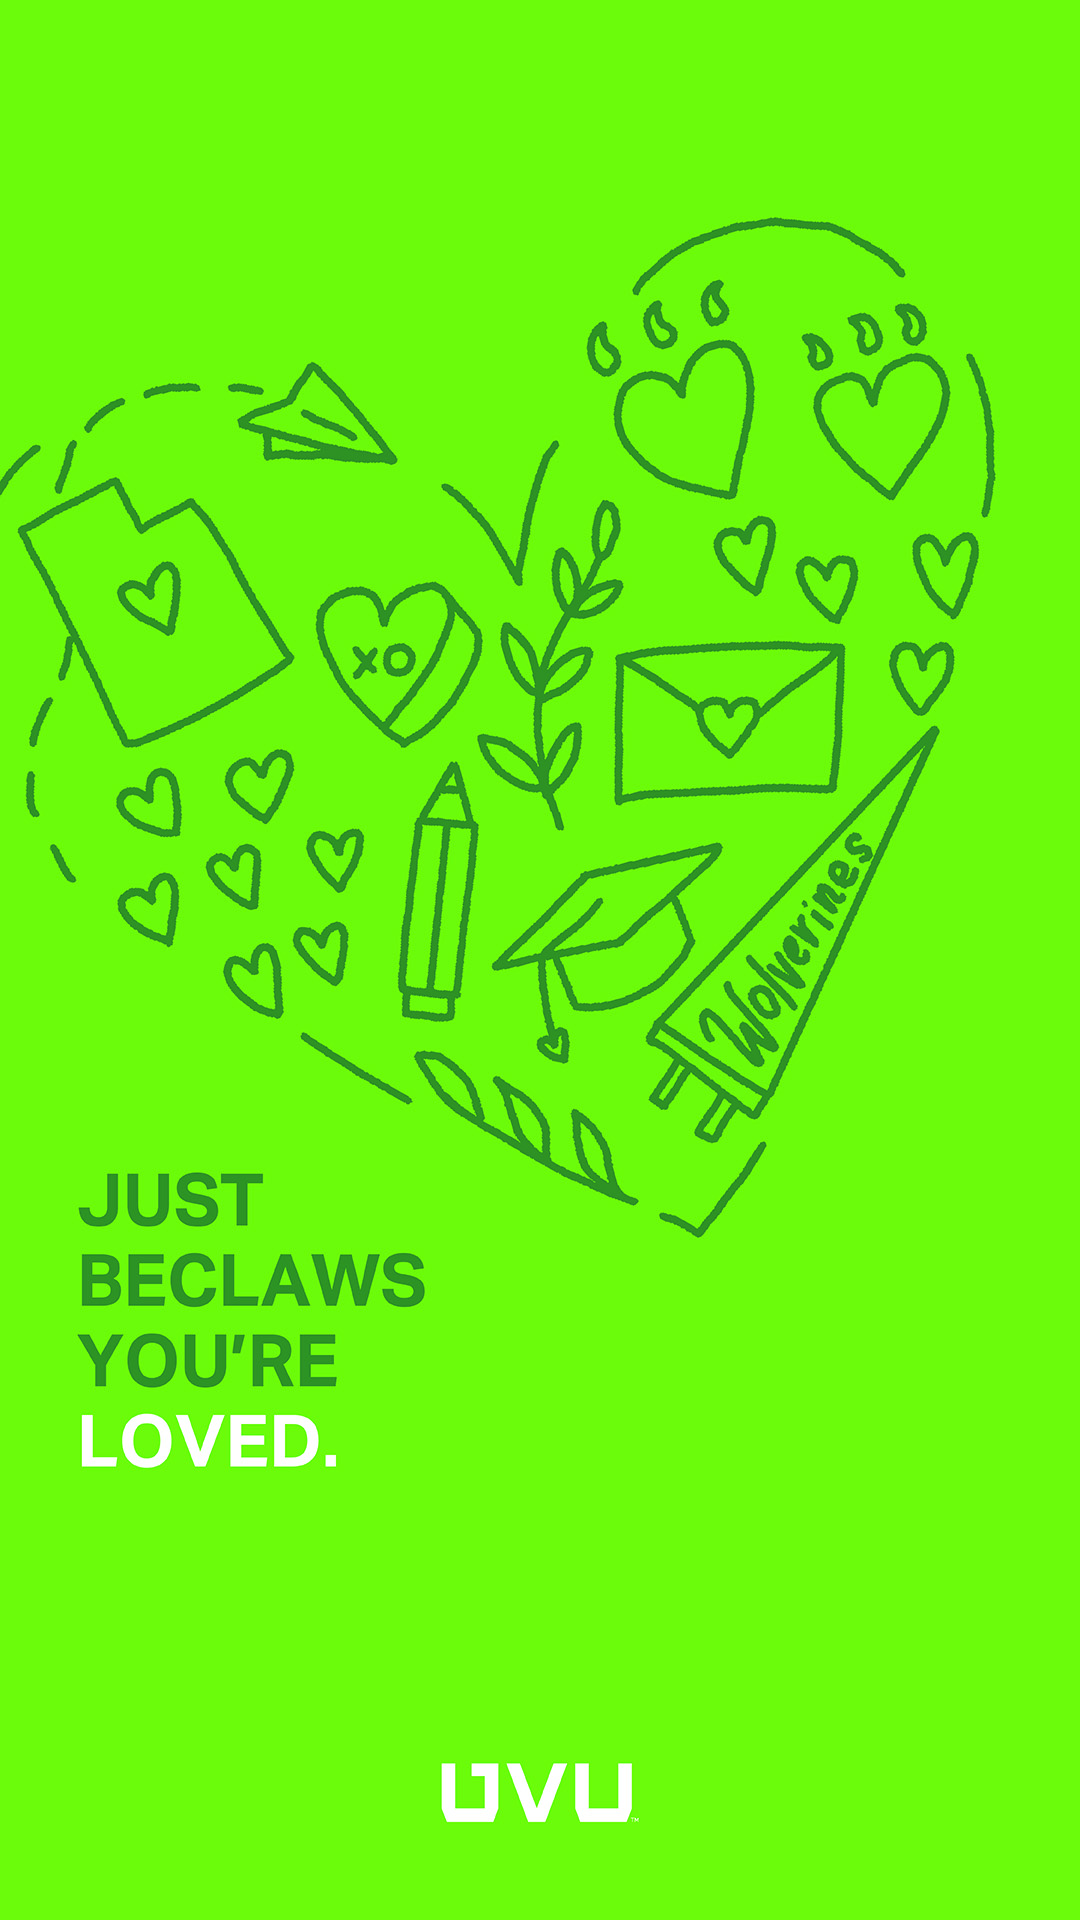 "Just beclaws you're loved" Instagram story